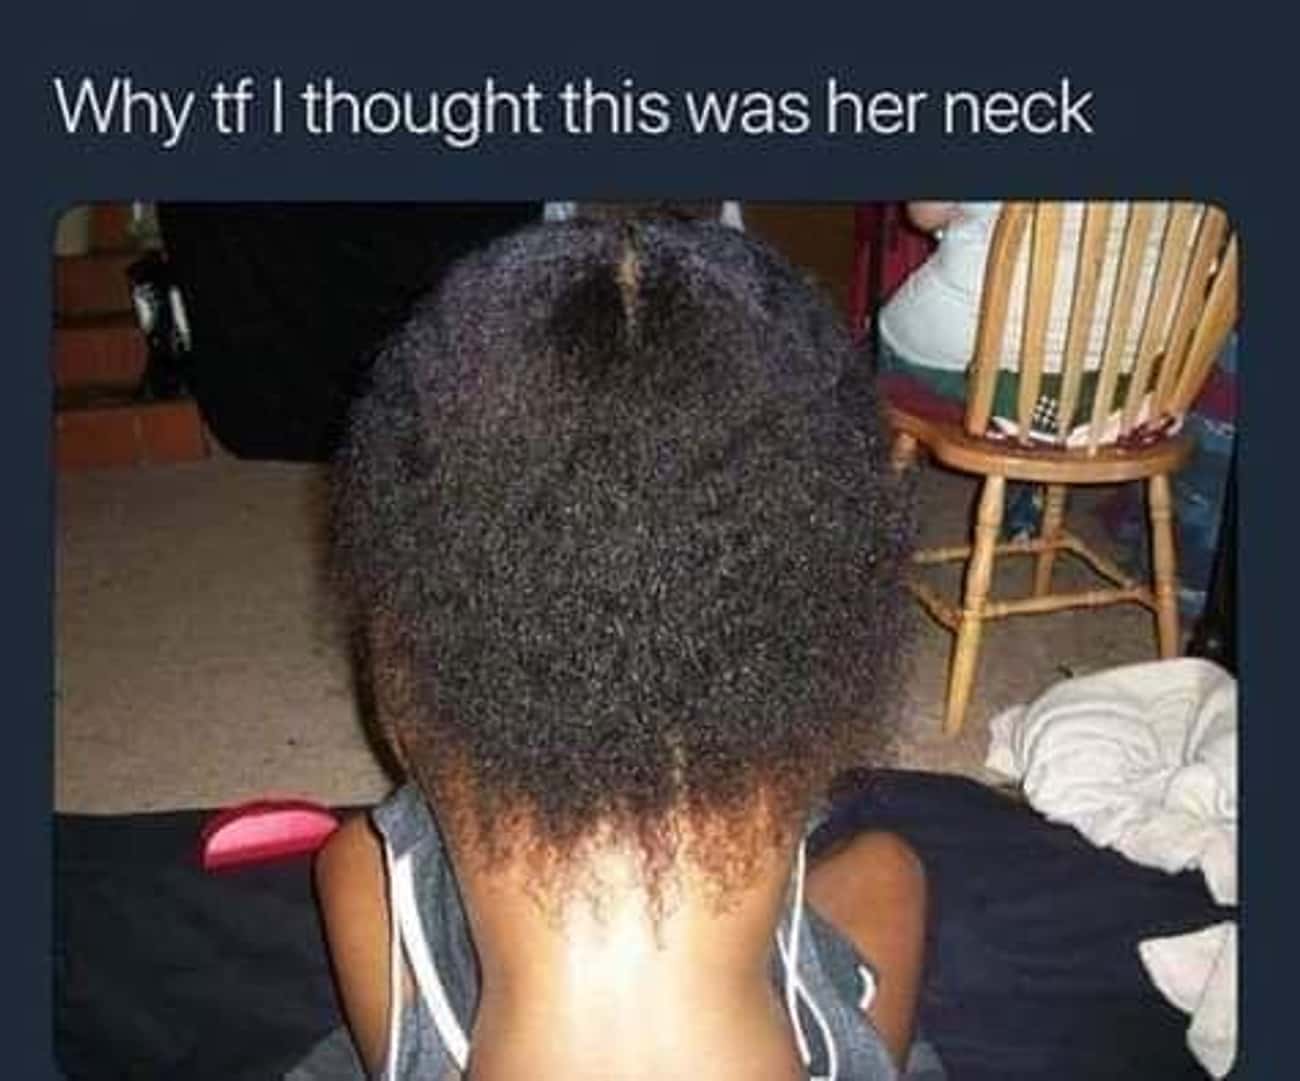 Answer: It's Her Back